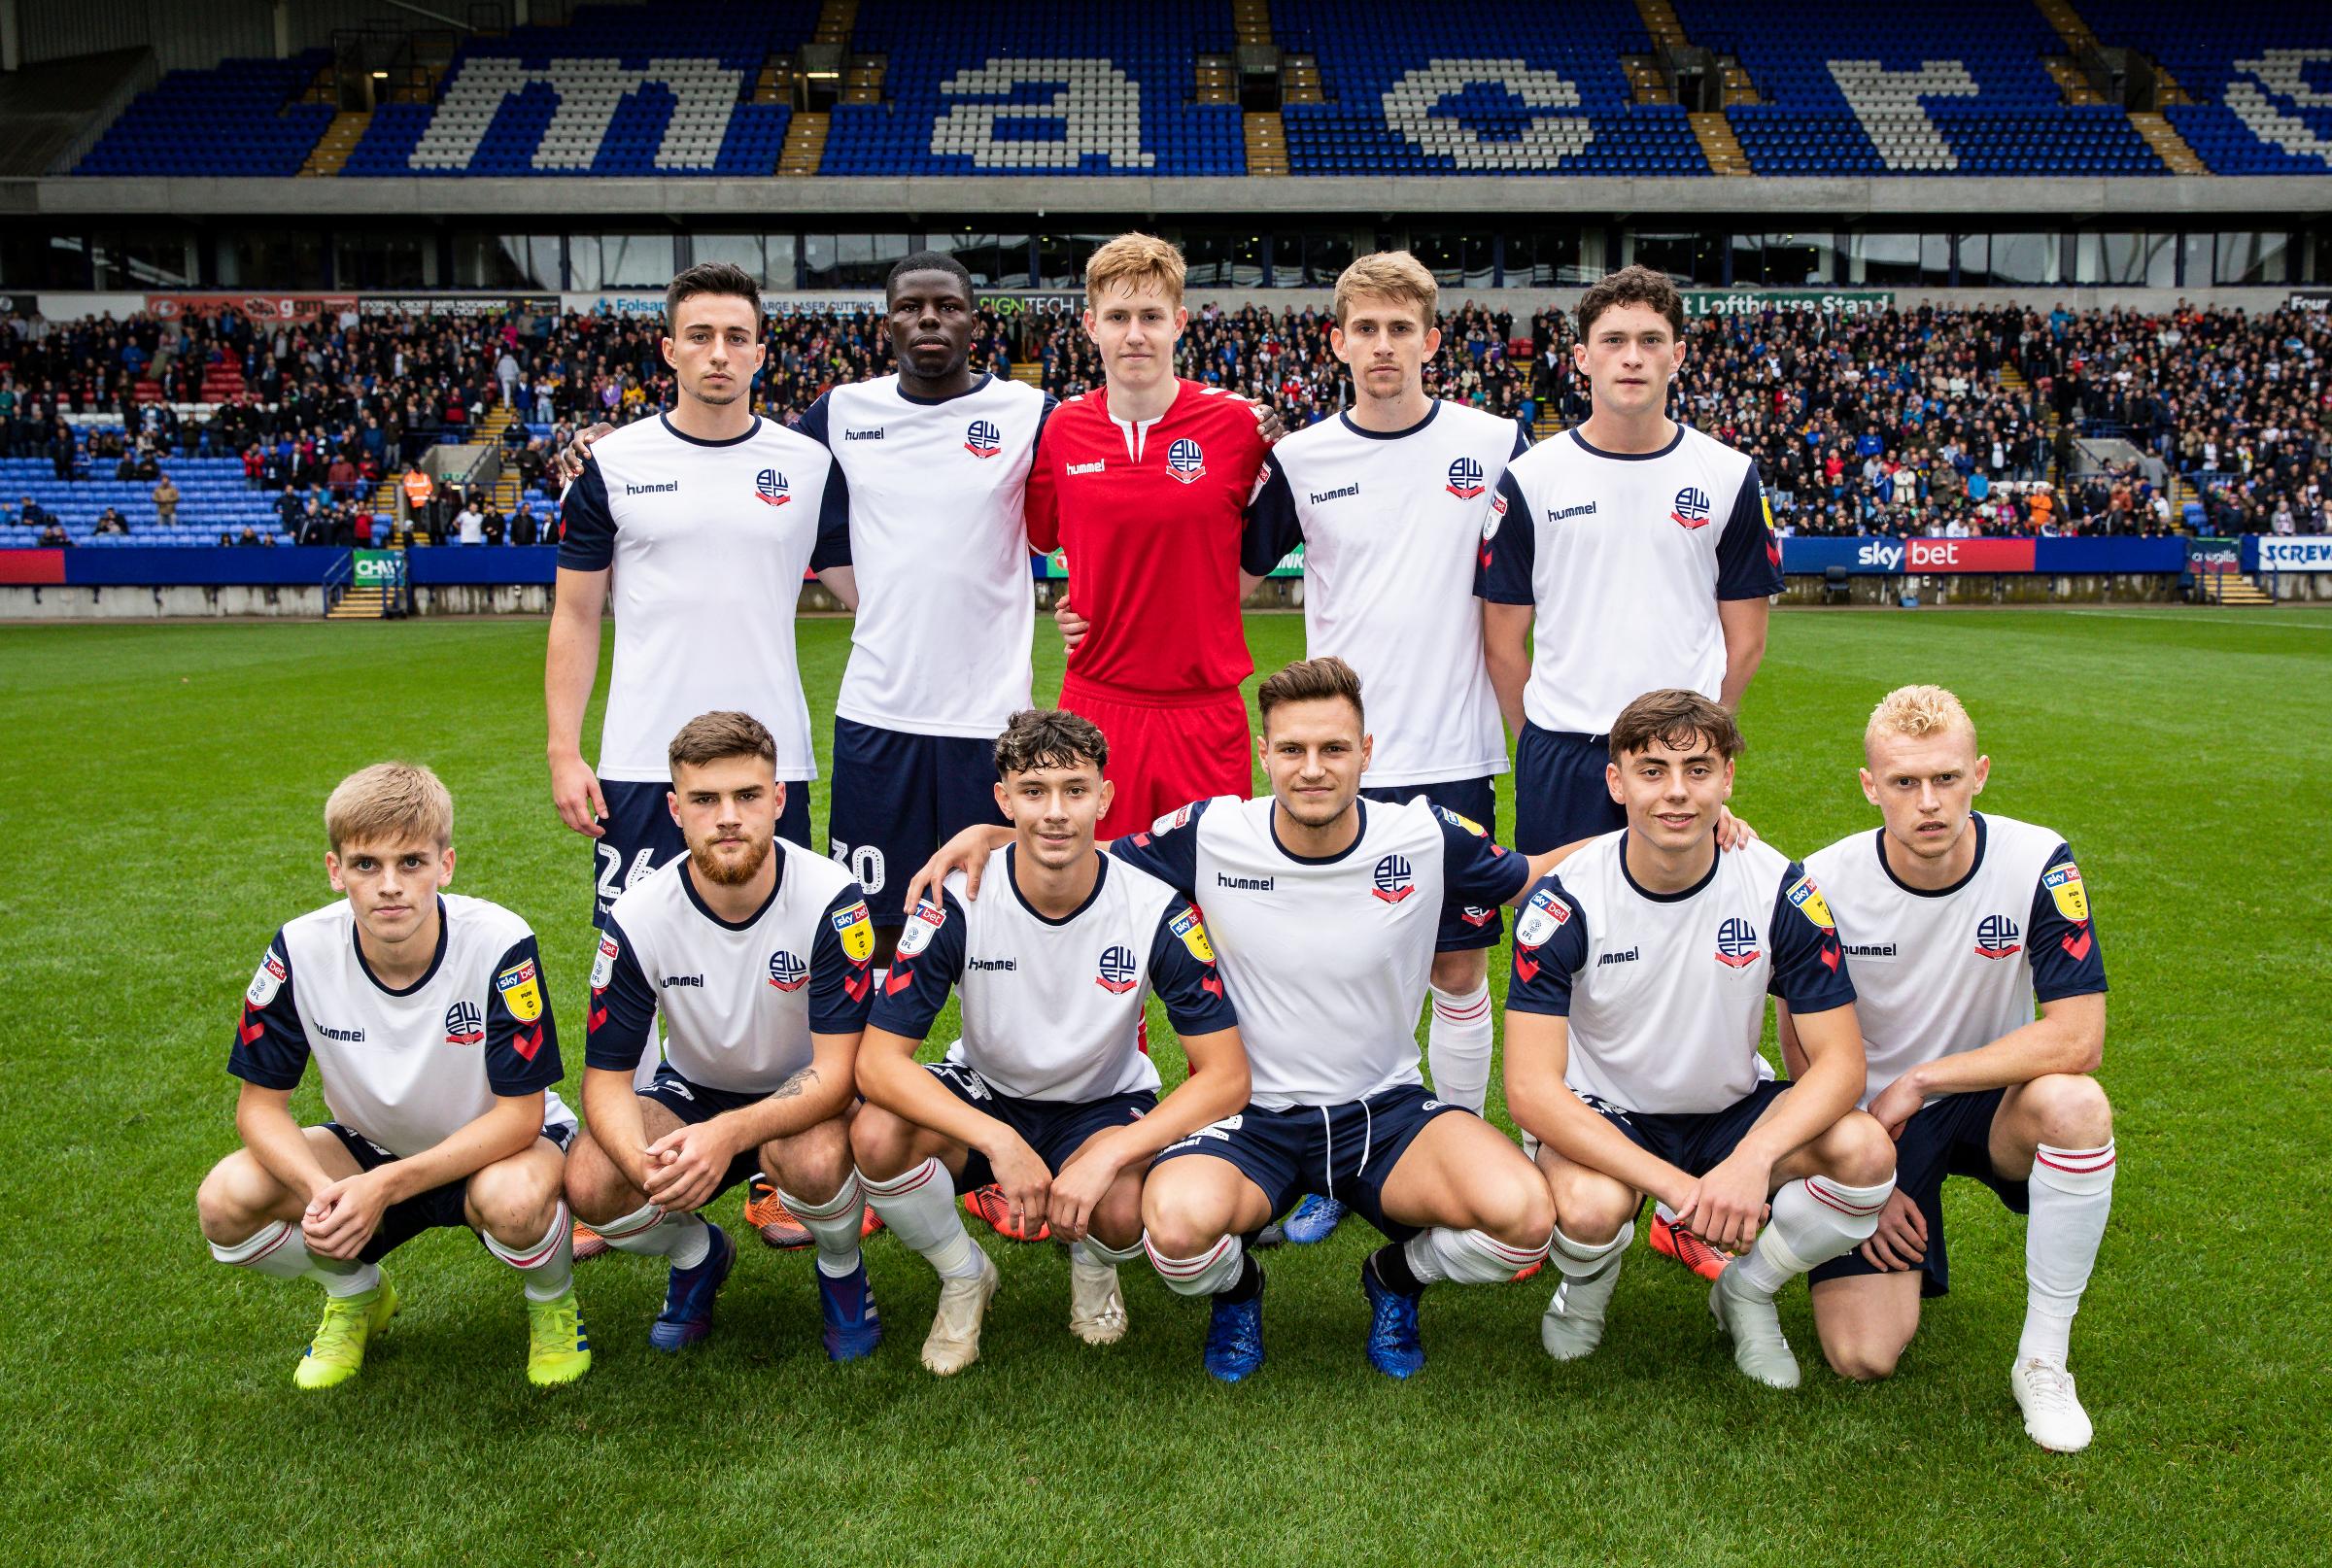 The story behind the youngest team in Bolton Wanderers' history